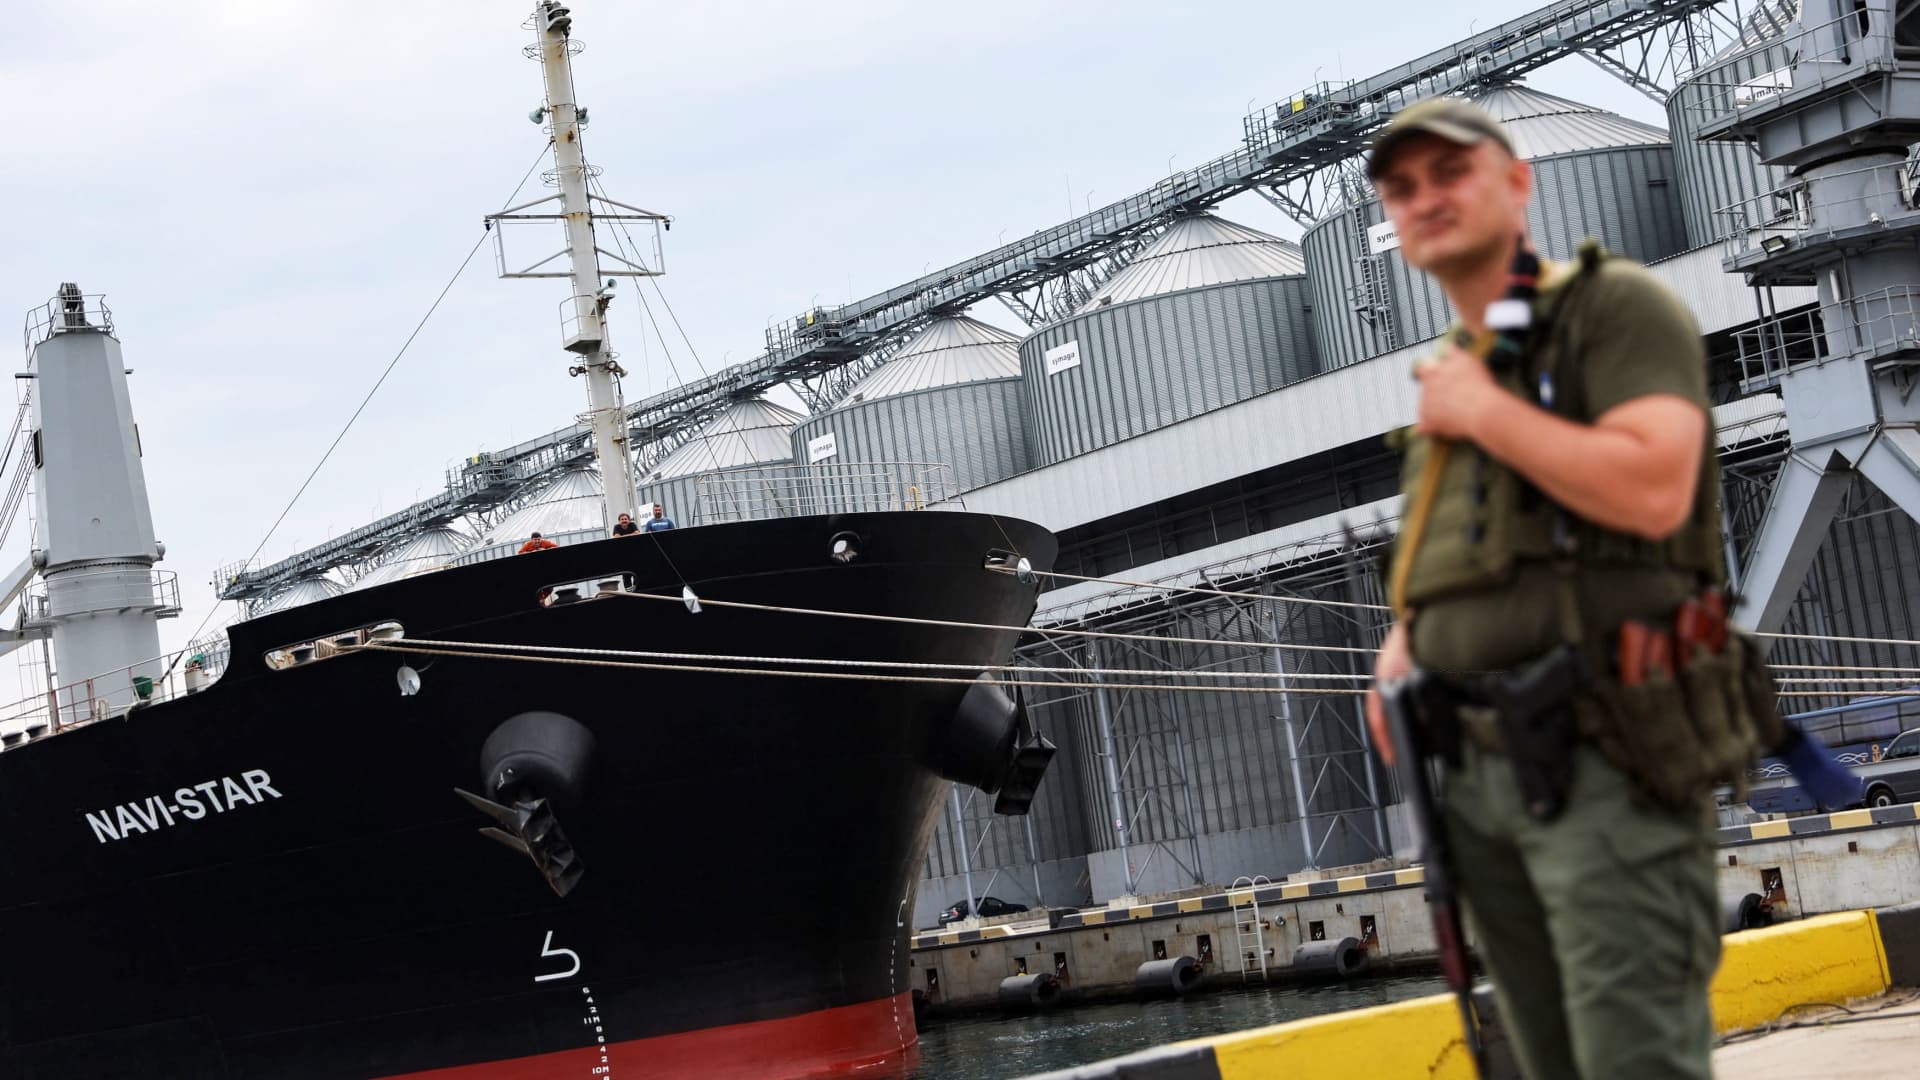 A Ukrainian serviceman stands in front of silos of grain from Odesa Black Sea port, before the shipment of grain as the government of Ukraine awaits signal from UN and Turkey to start grain shipments, amid Russia's invasion of Ukraine, in Odesa, Ukraine July 29, 2022. REUTERS/Nacho Doce